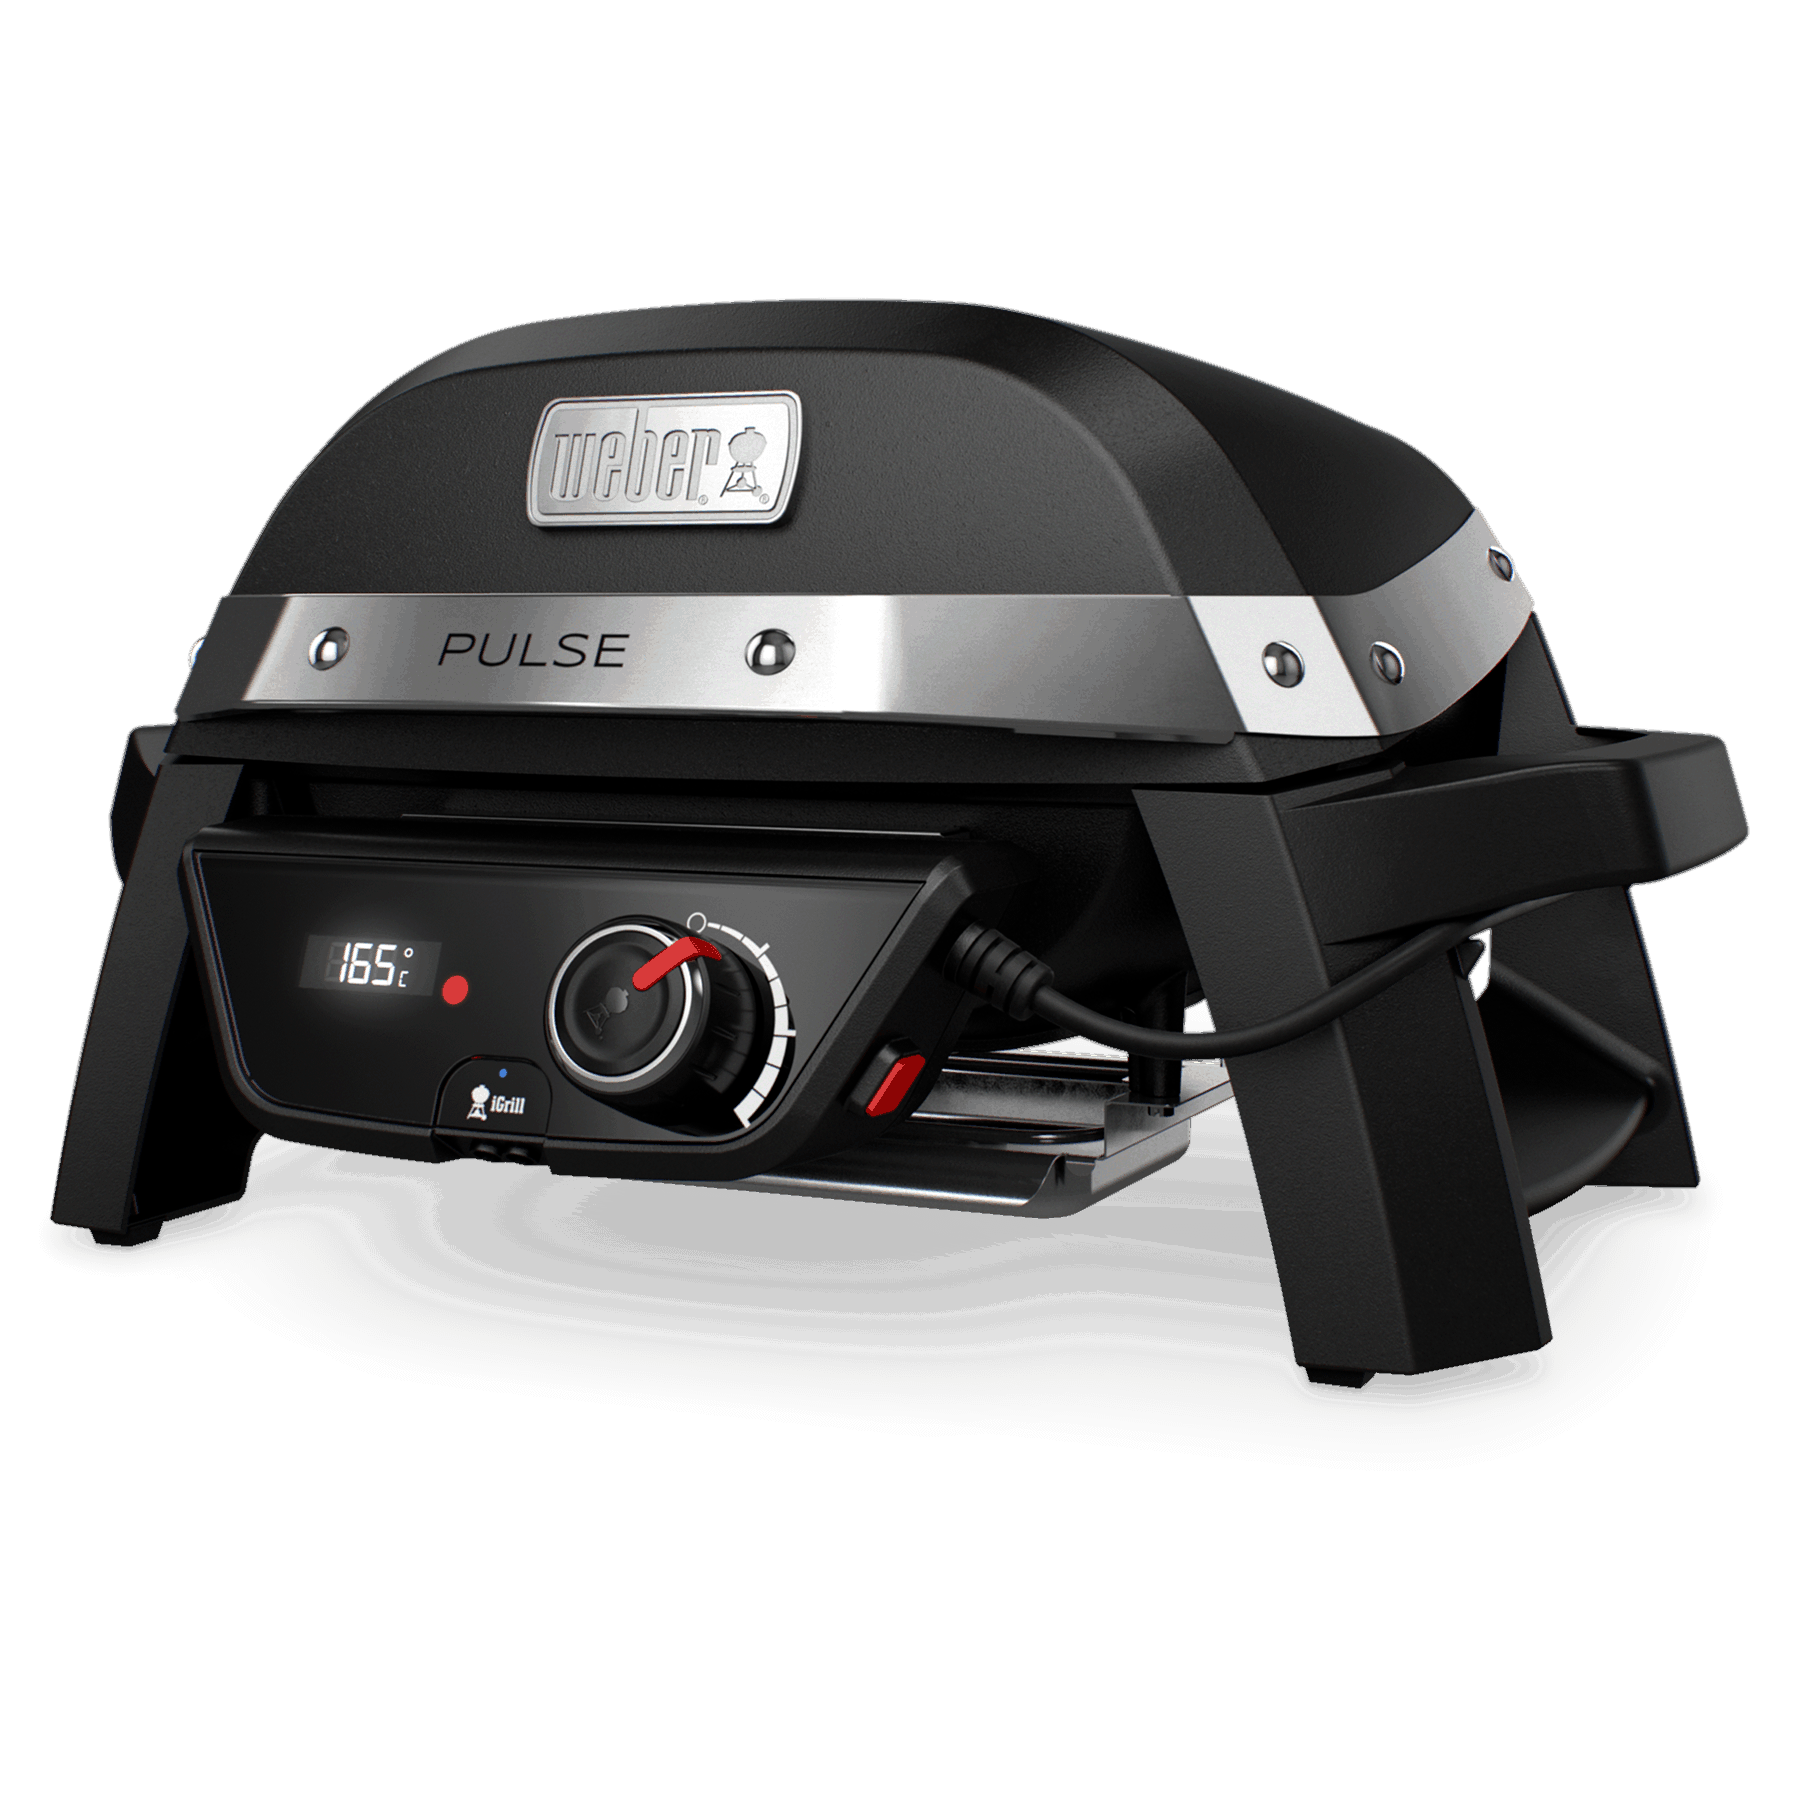 Pulse 1000 Barbecue | Pulse Series | Weber Grills